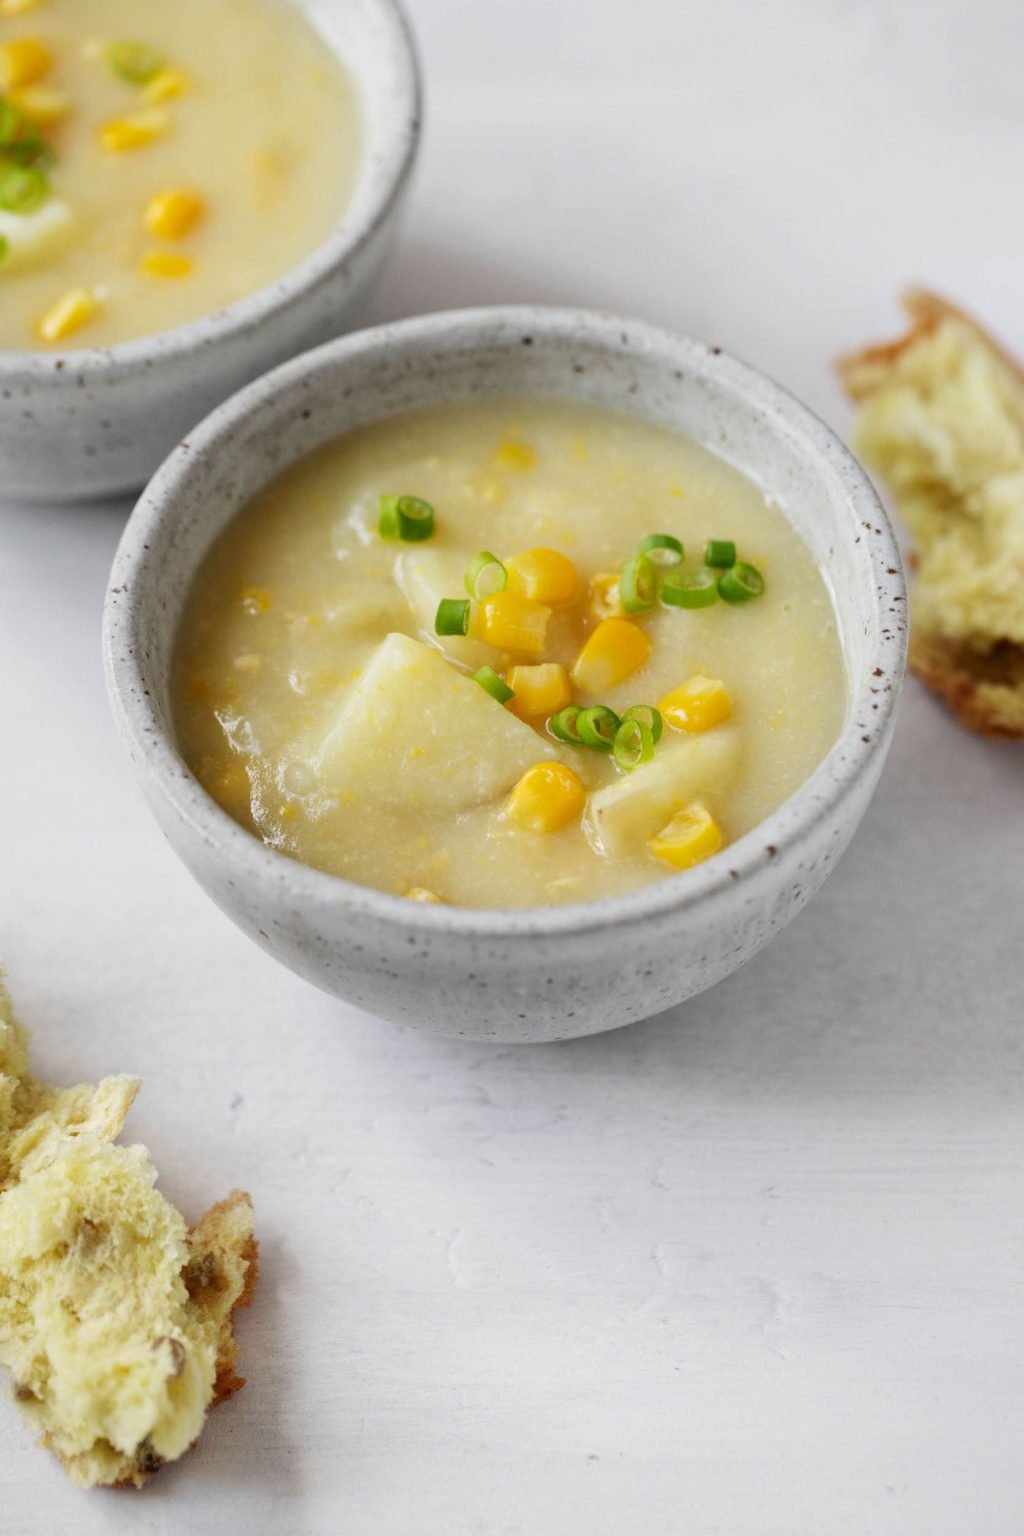 A small bowl of creamy vegan cauliflower corn chowder, topped with snipped chives and served with torn pieces of bread.